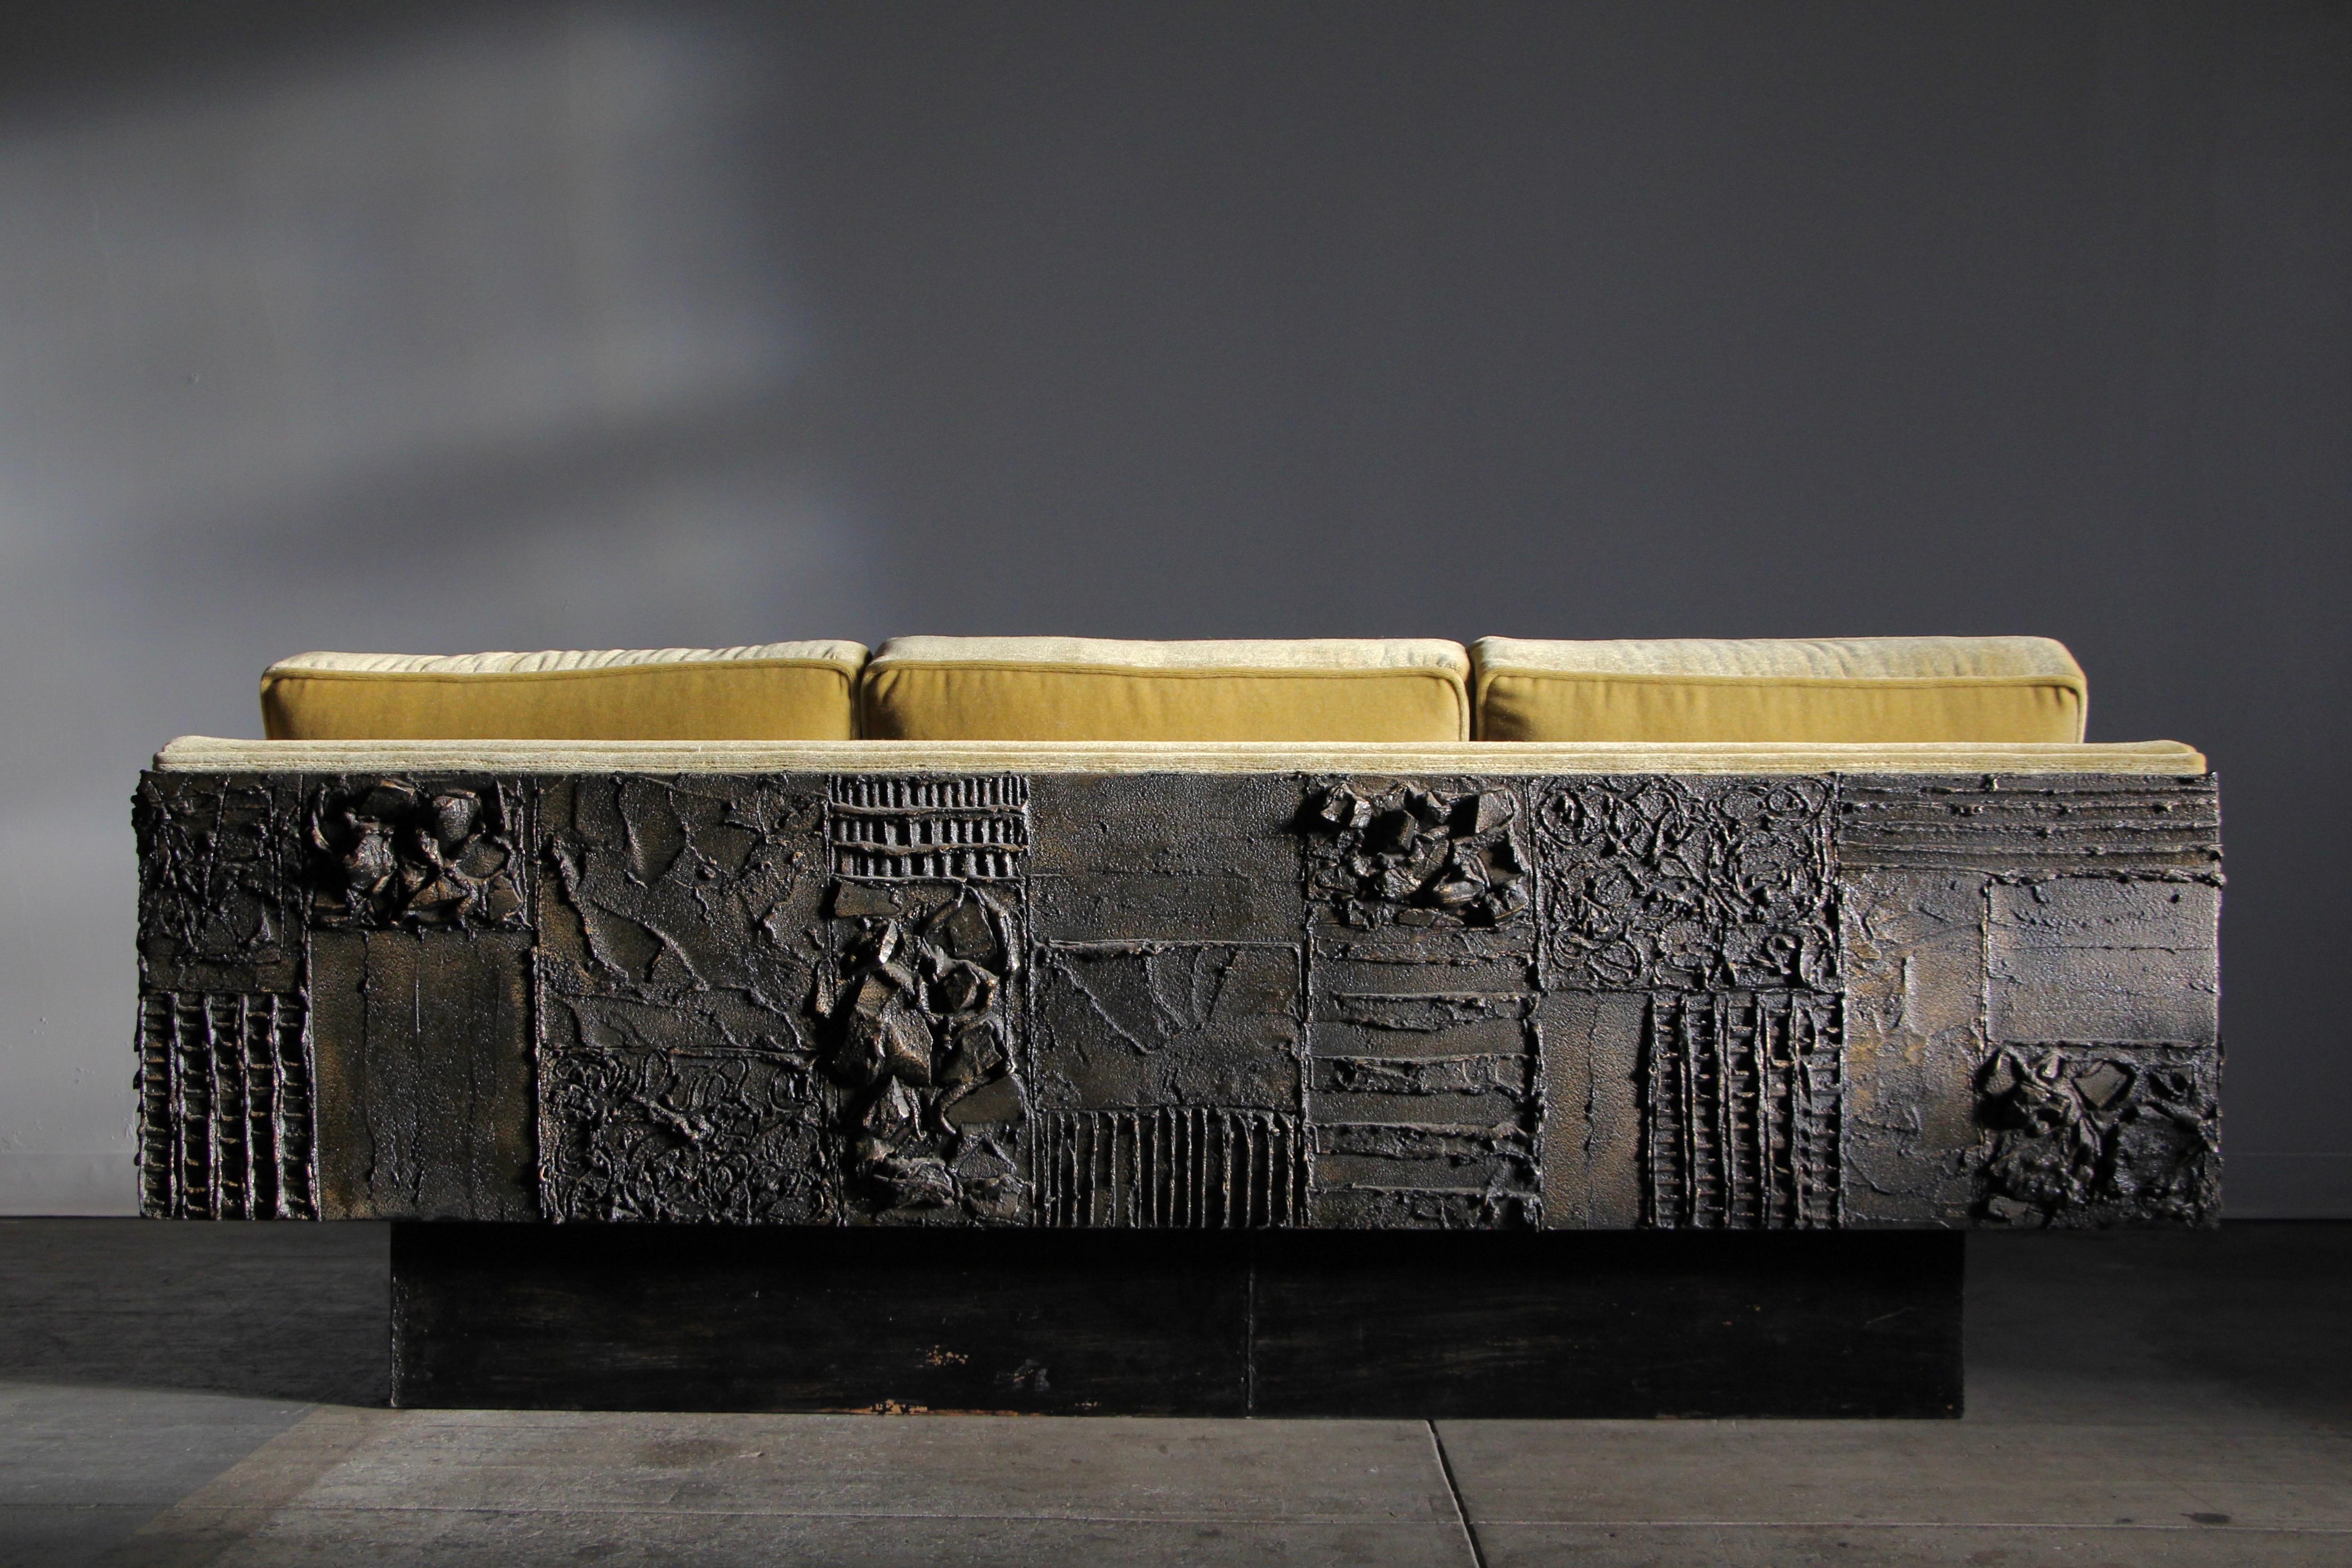 Here's a piece for all the Paul Evans collectors out there. This sensational, sculpted bronze sofa came from the original owners who custom ordered the piece through Directional Furniture in 1969. 

These 